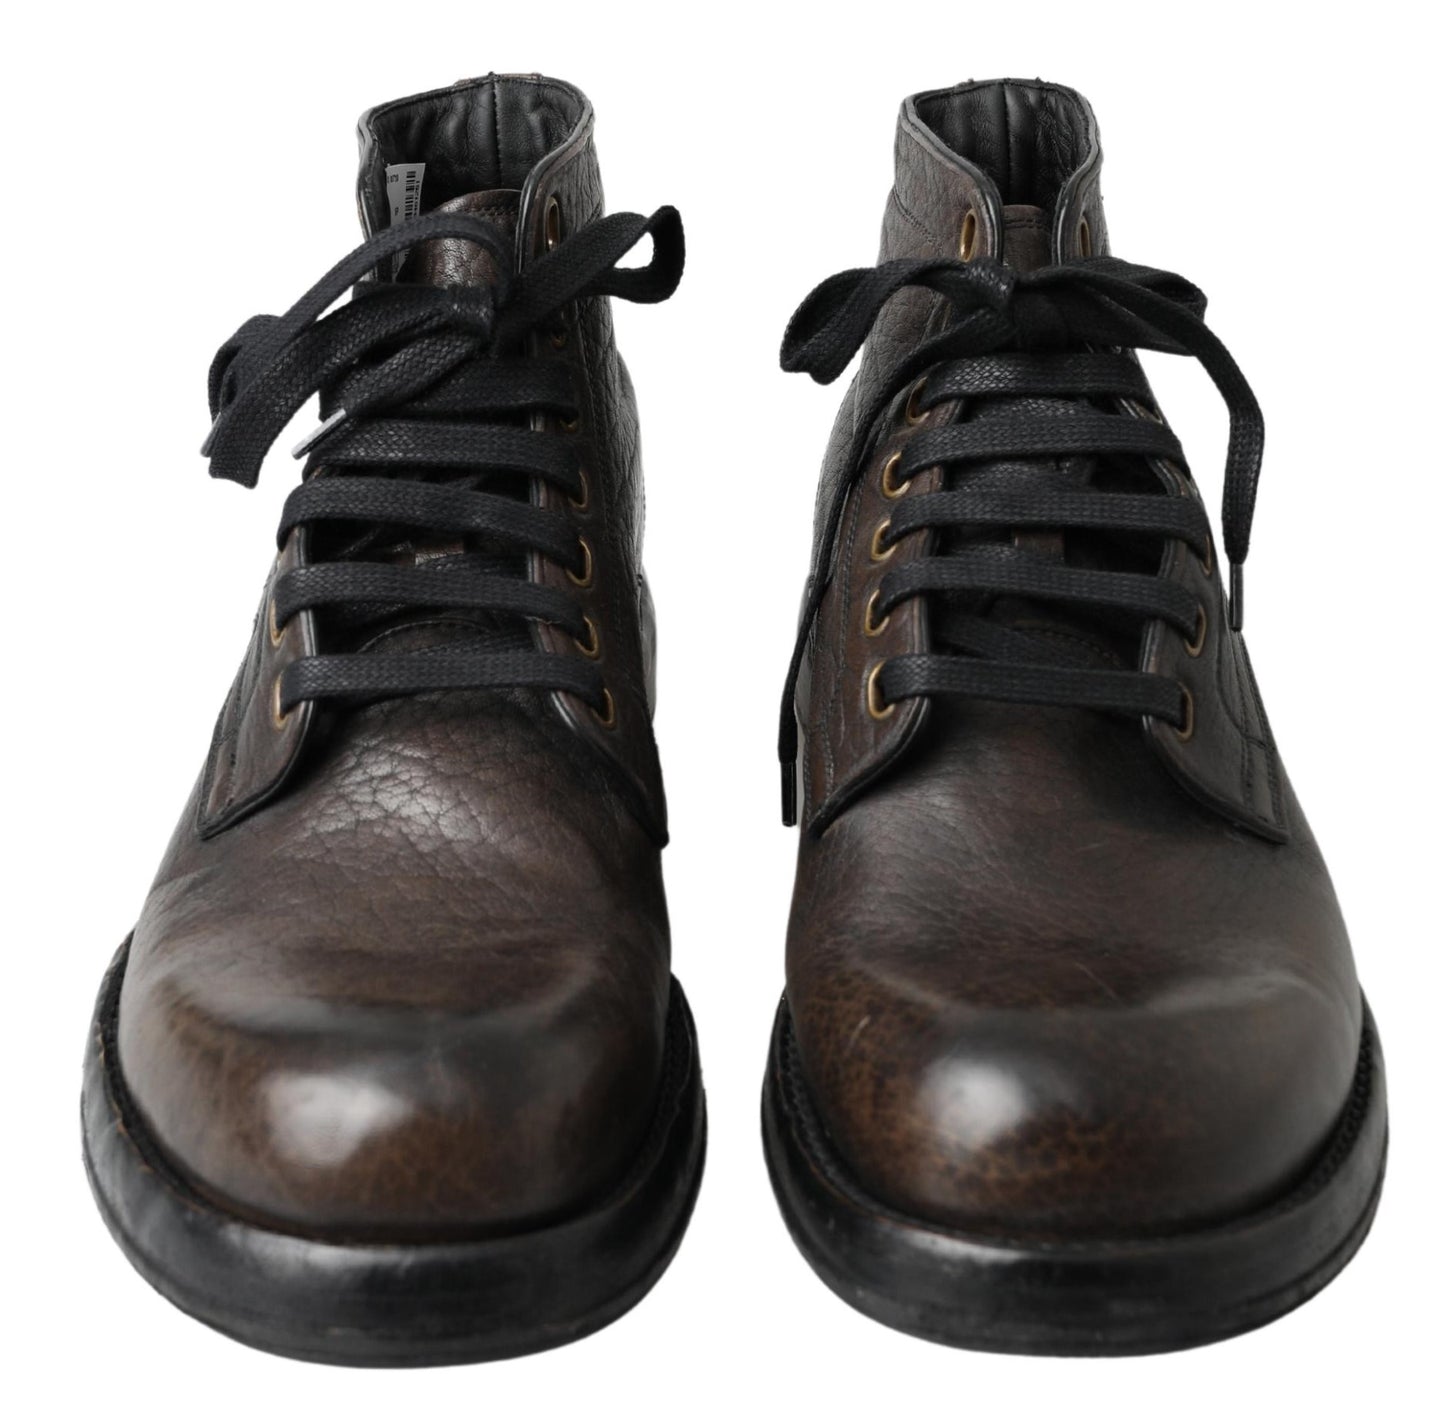 Elegant Leather Lace-Up Boots for Men